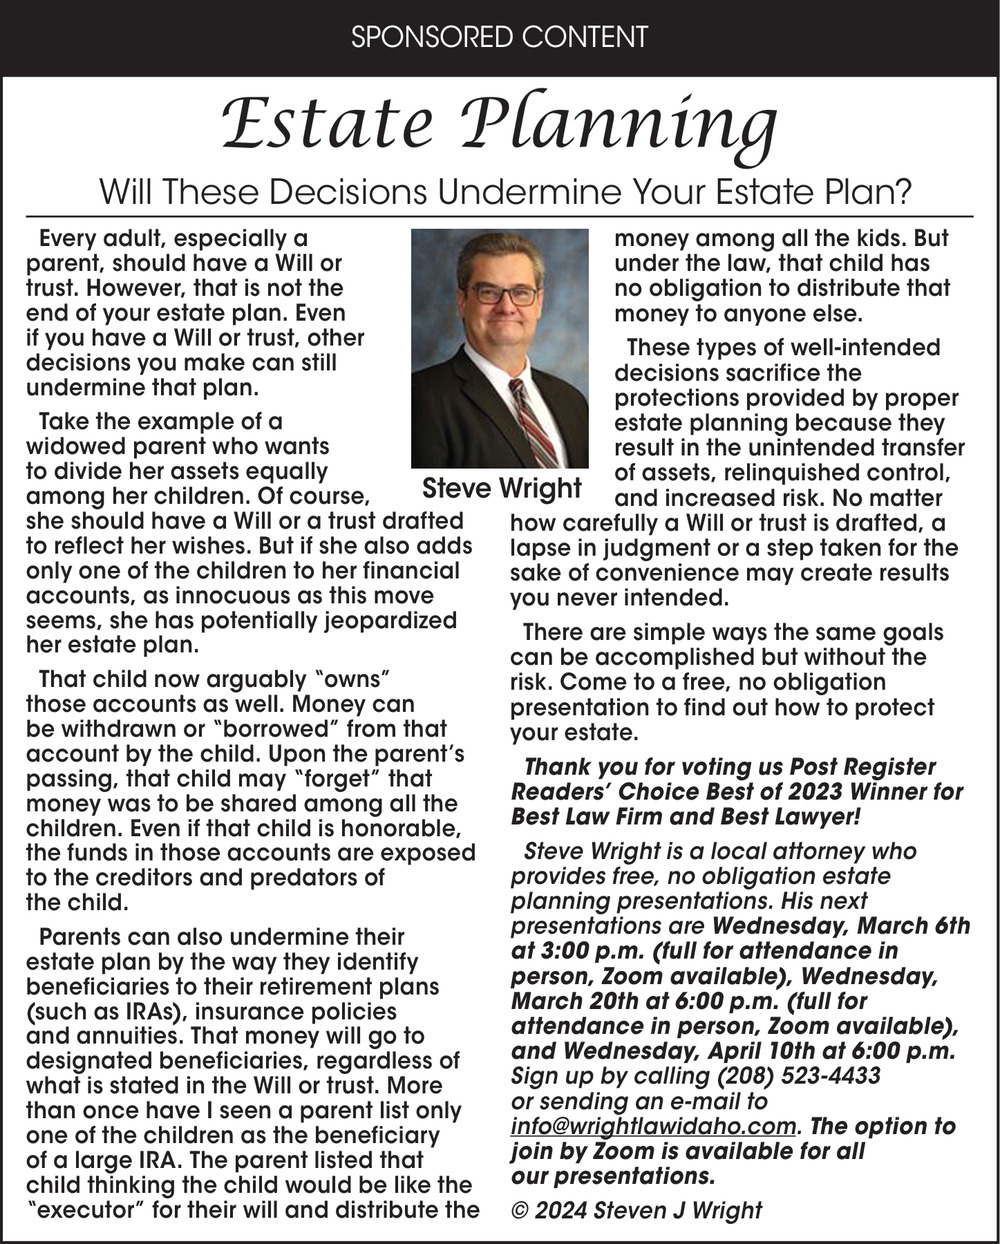 Estate Planning, Wright Law Offices, Idaho Falls, ID